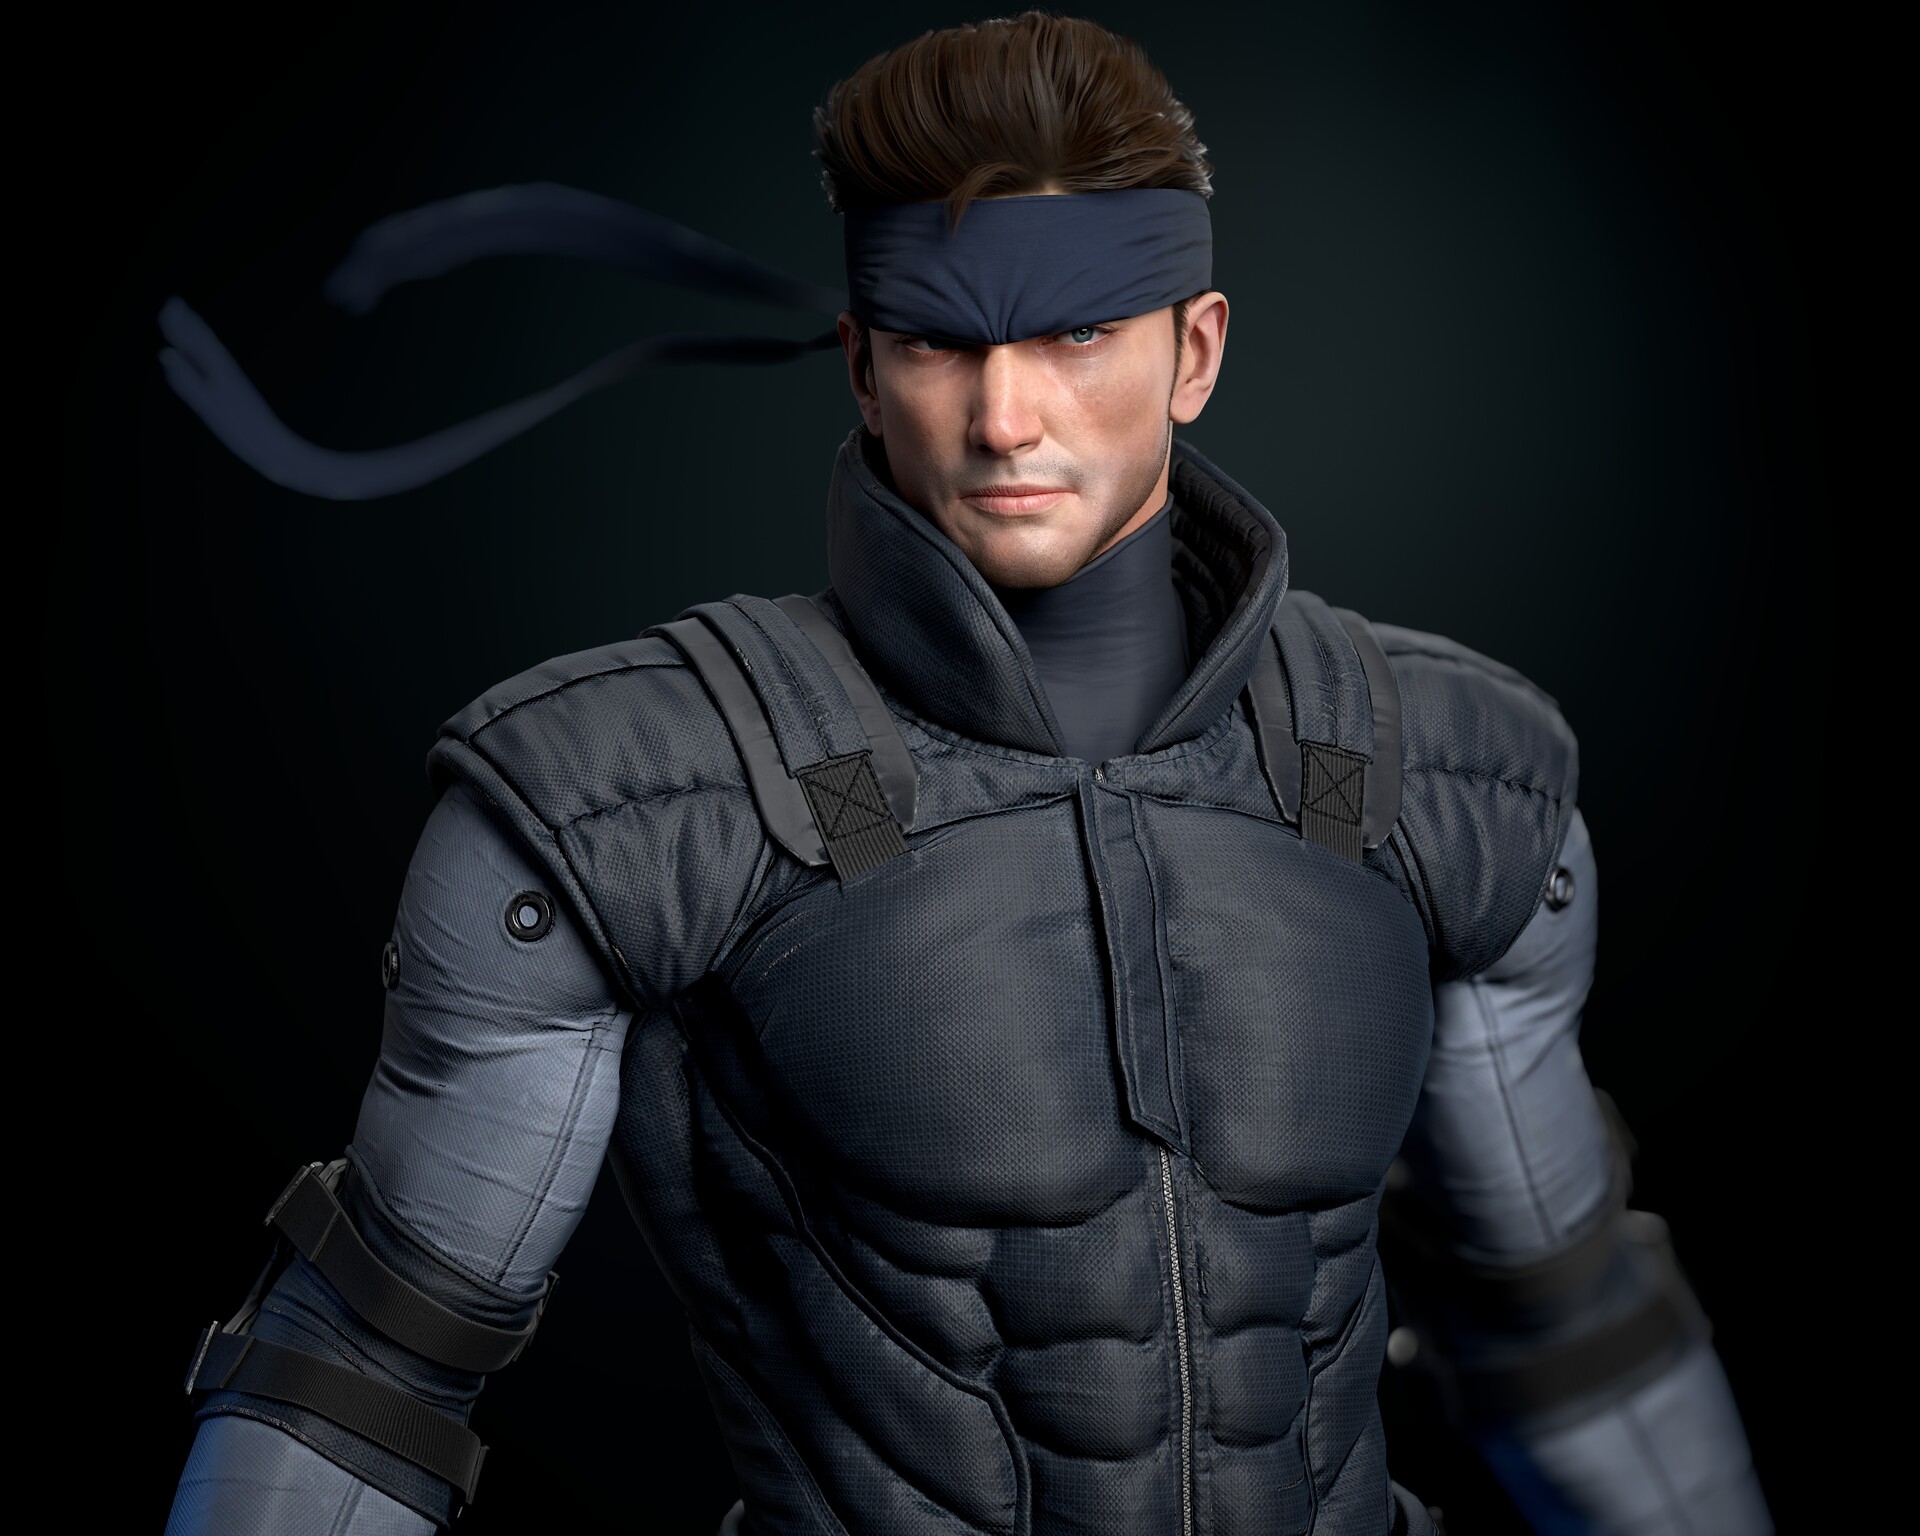 Solid Snake-Artwork by @starart_ia